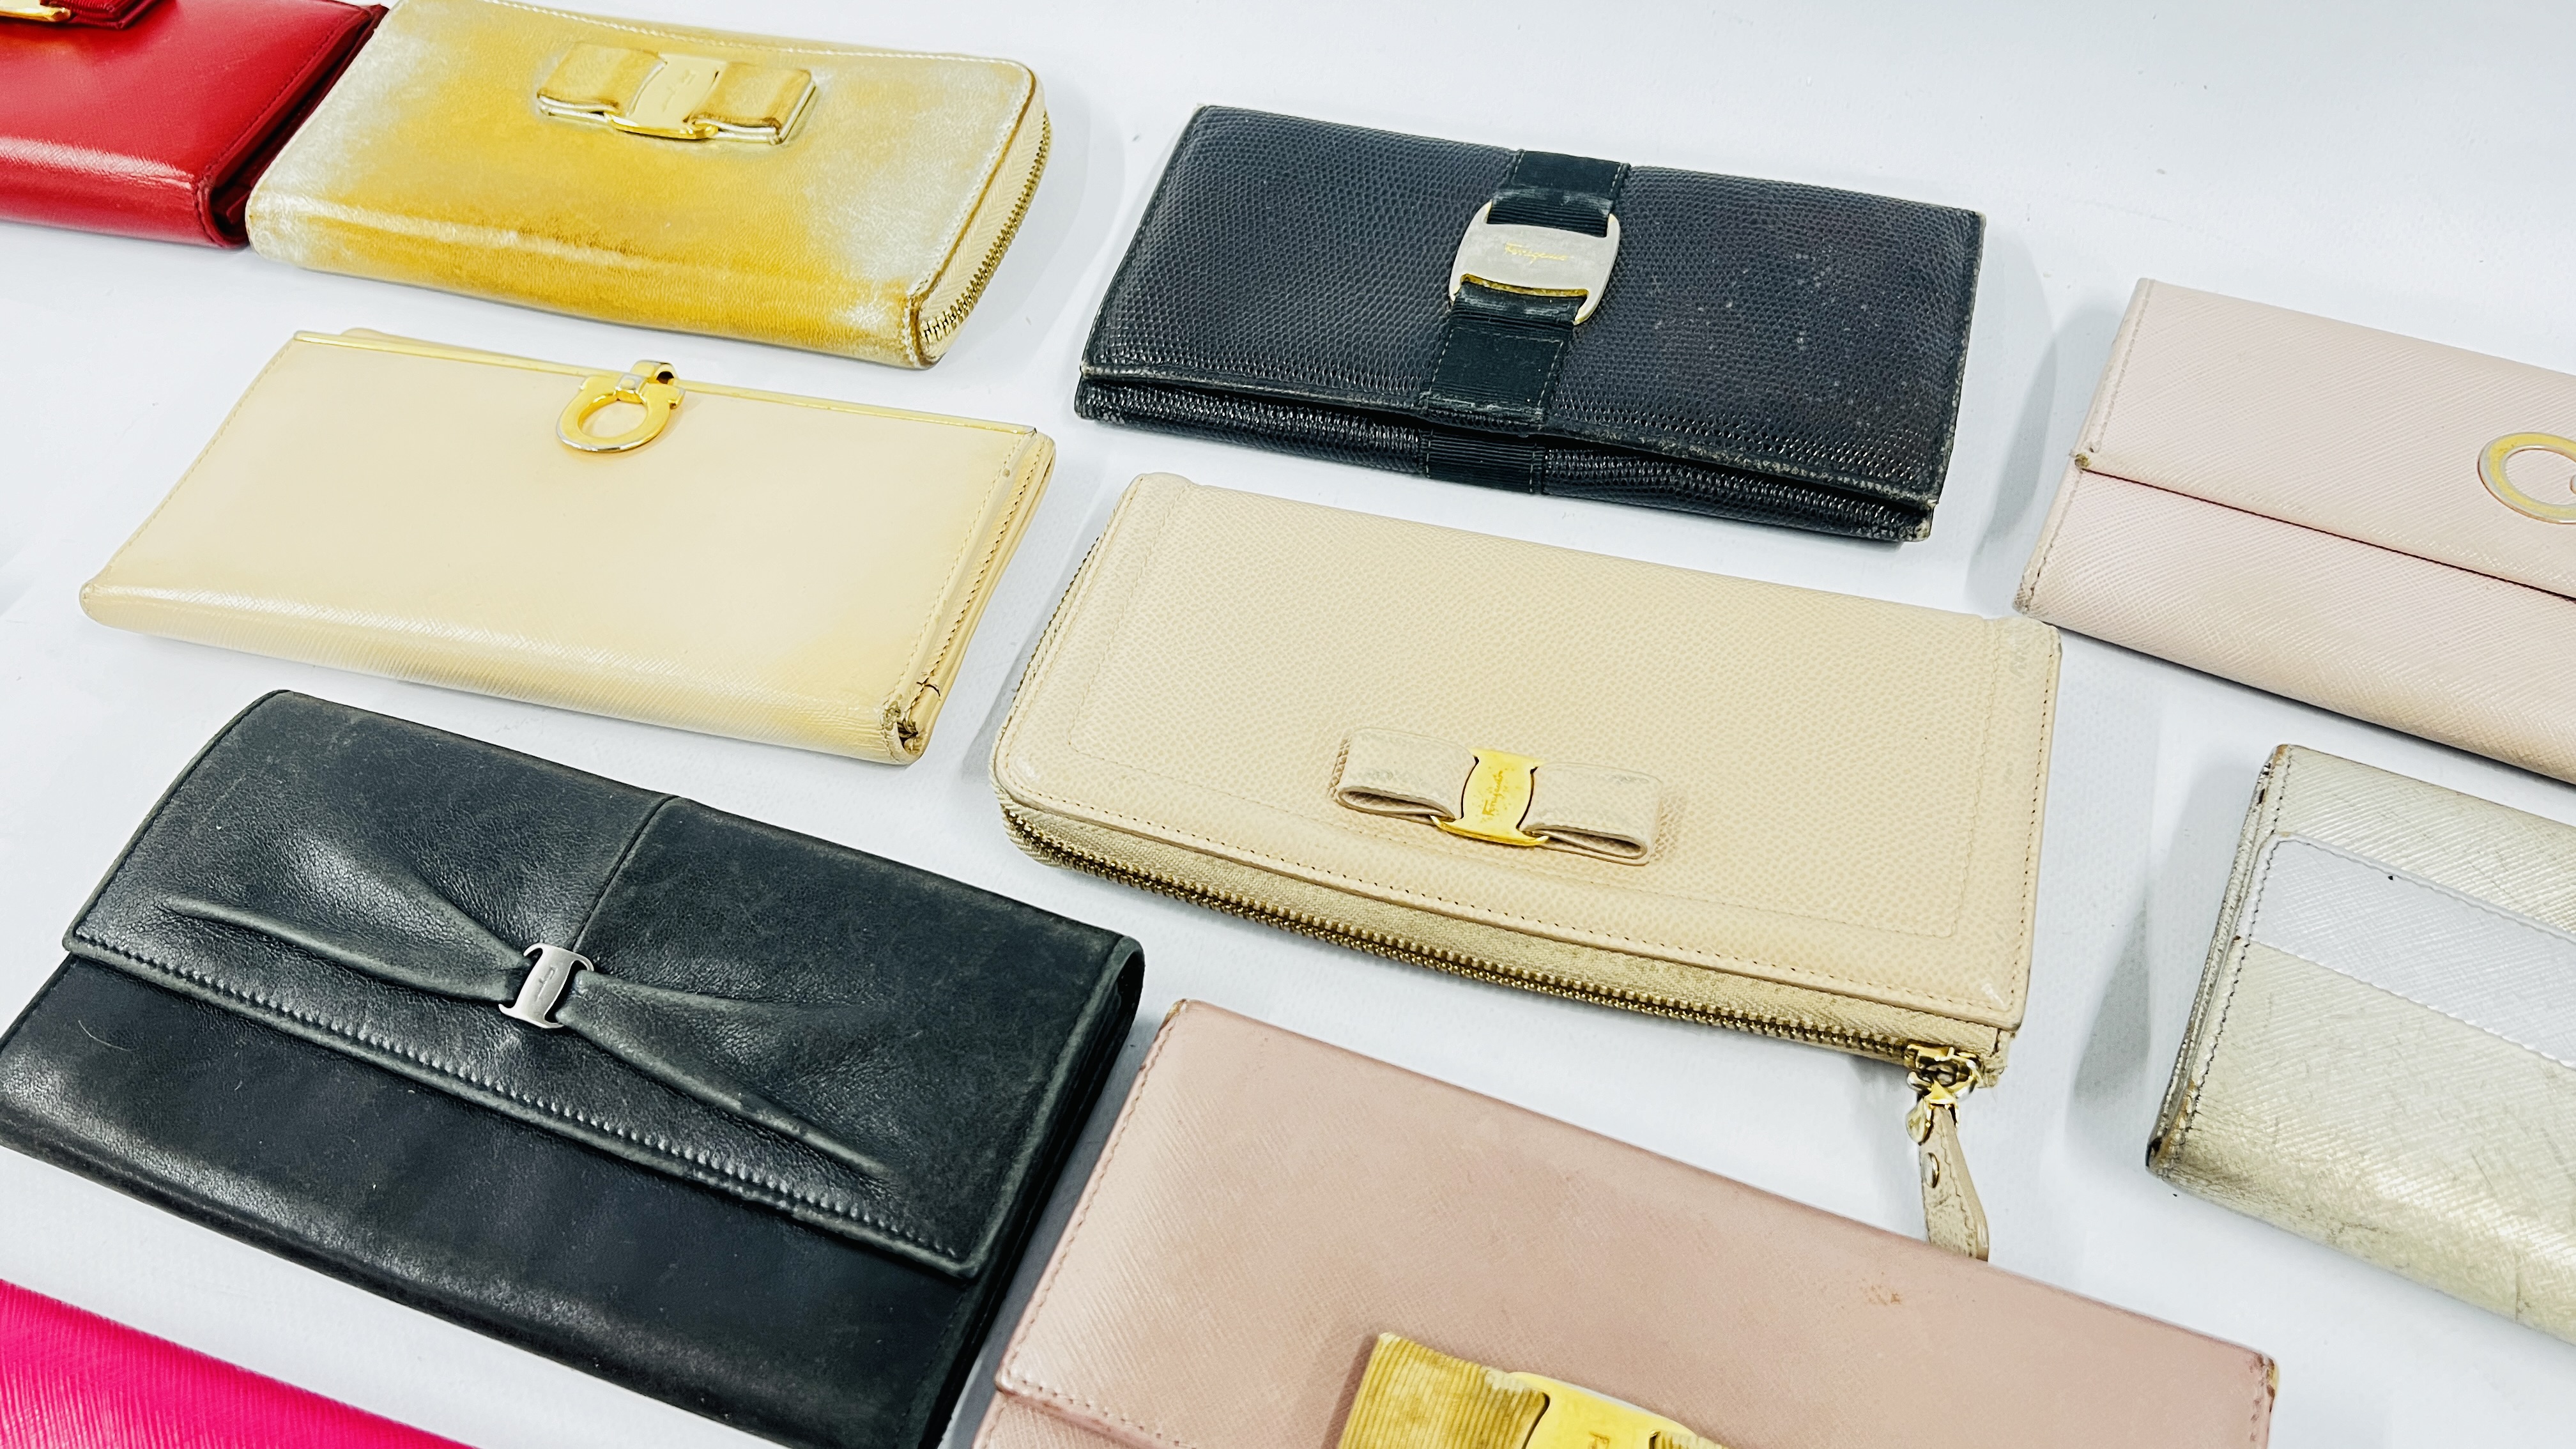 A COLLECTION OF 11 DESIGNER PURSES MARKED "SALVADOR FERRAGAMA". - Image 4 of 6